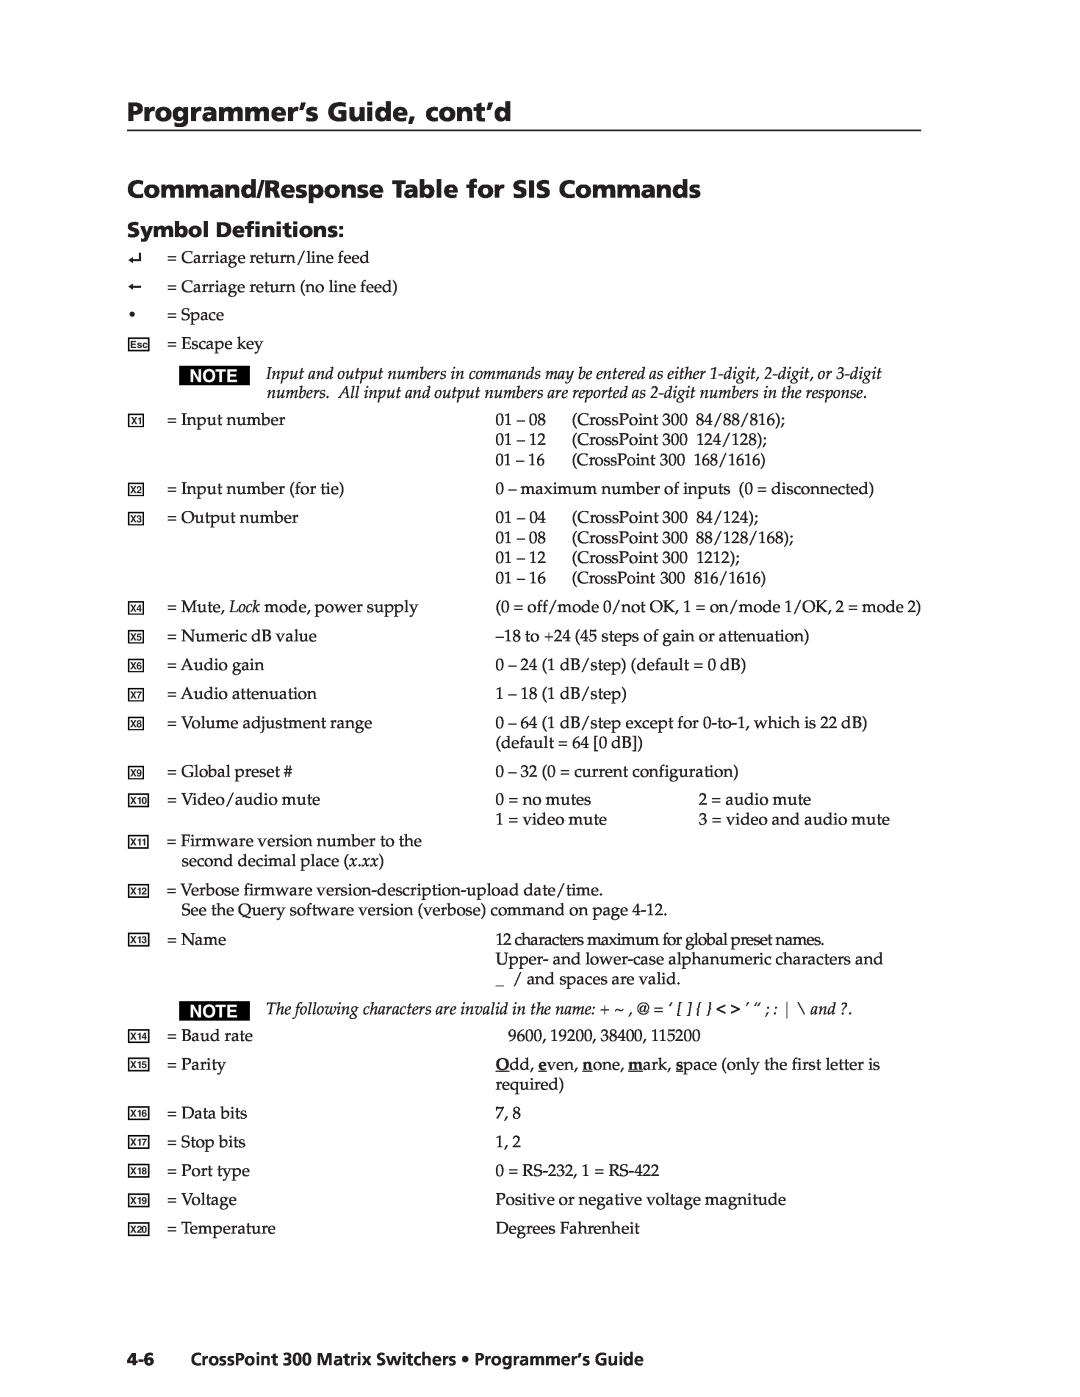 Extron electronic 168, 84, 1616, 124 Command/Response Table for SIS Commands, Symbol Definitions, Programmer’s Guide, cont’d 